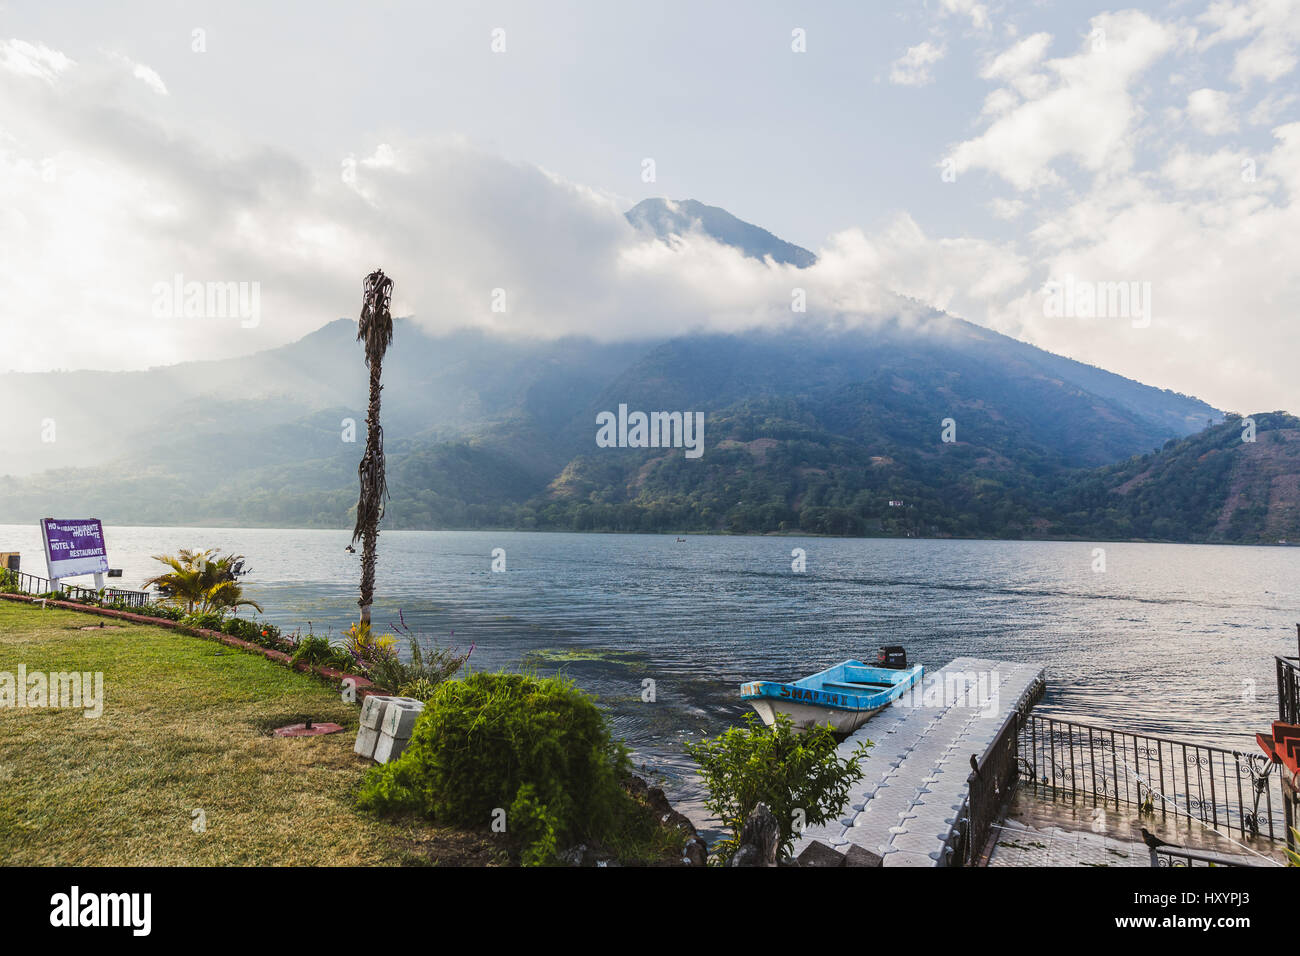 Boat dock in foreground and cloud-covered volcanic mountains in the distance at Lake Atitlan, Guatemala, Central America. Stock Photo